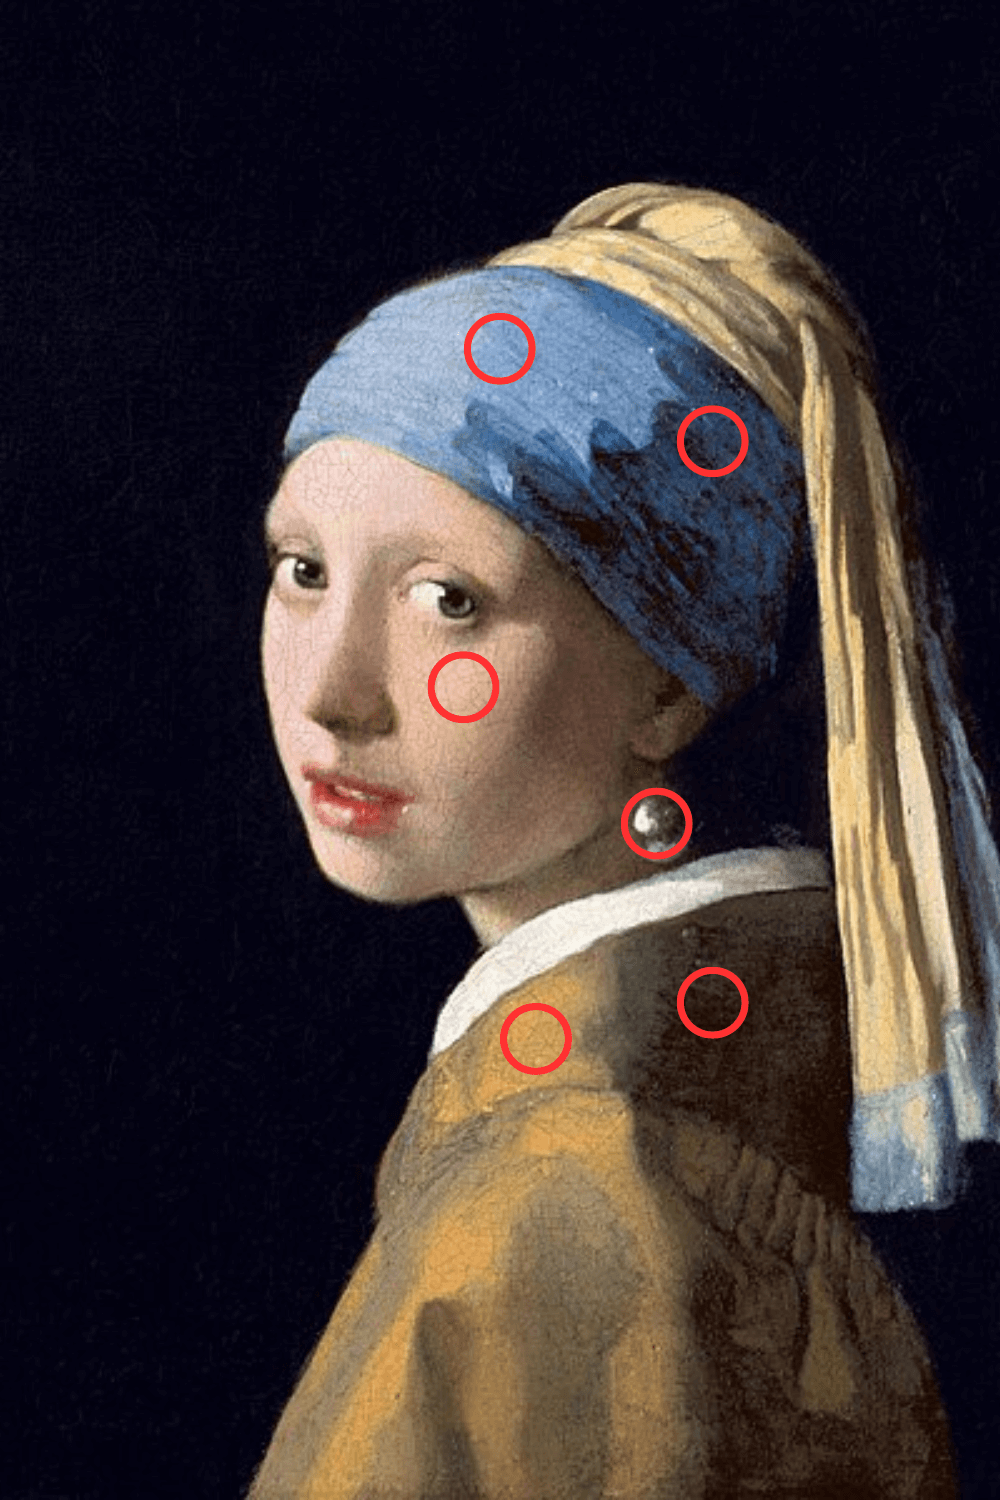 Polymer Clay: Girl with a pearl earring with 6 small red circles indicating the exact spots the color were borrowed from